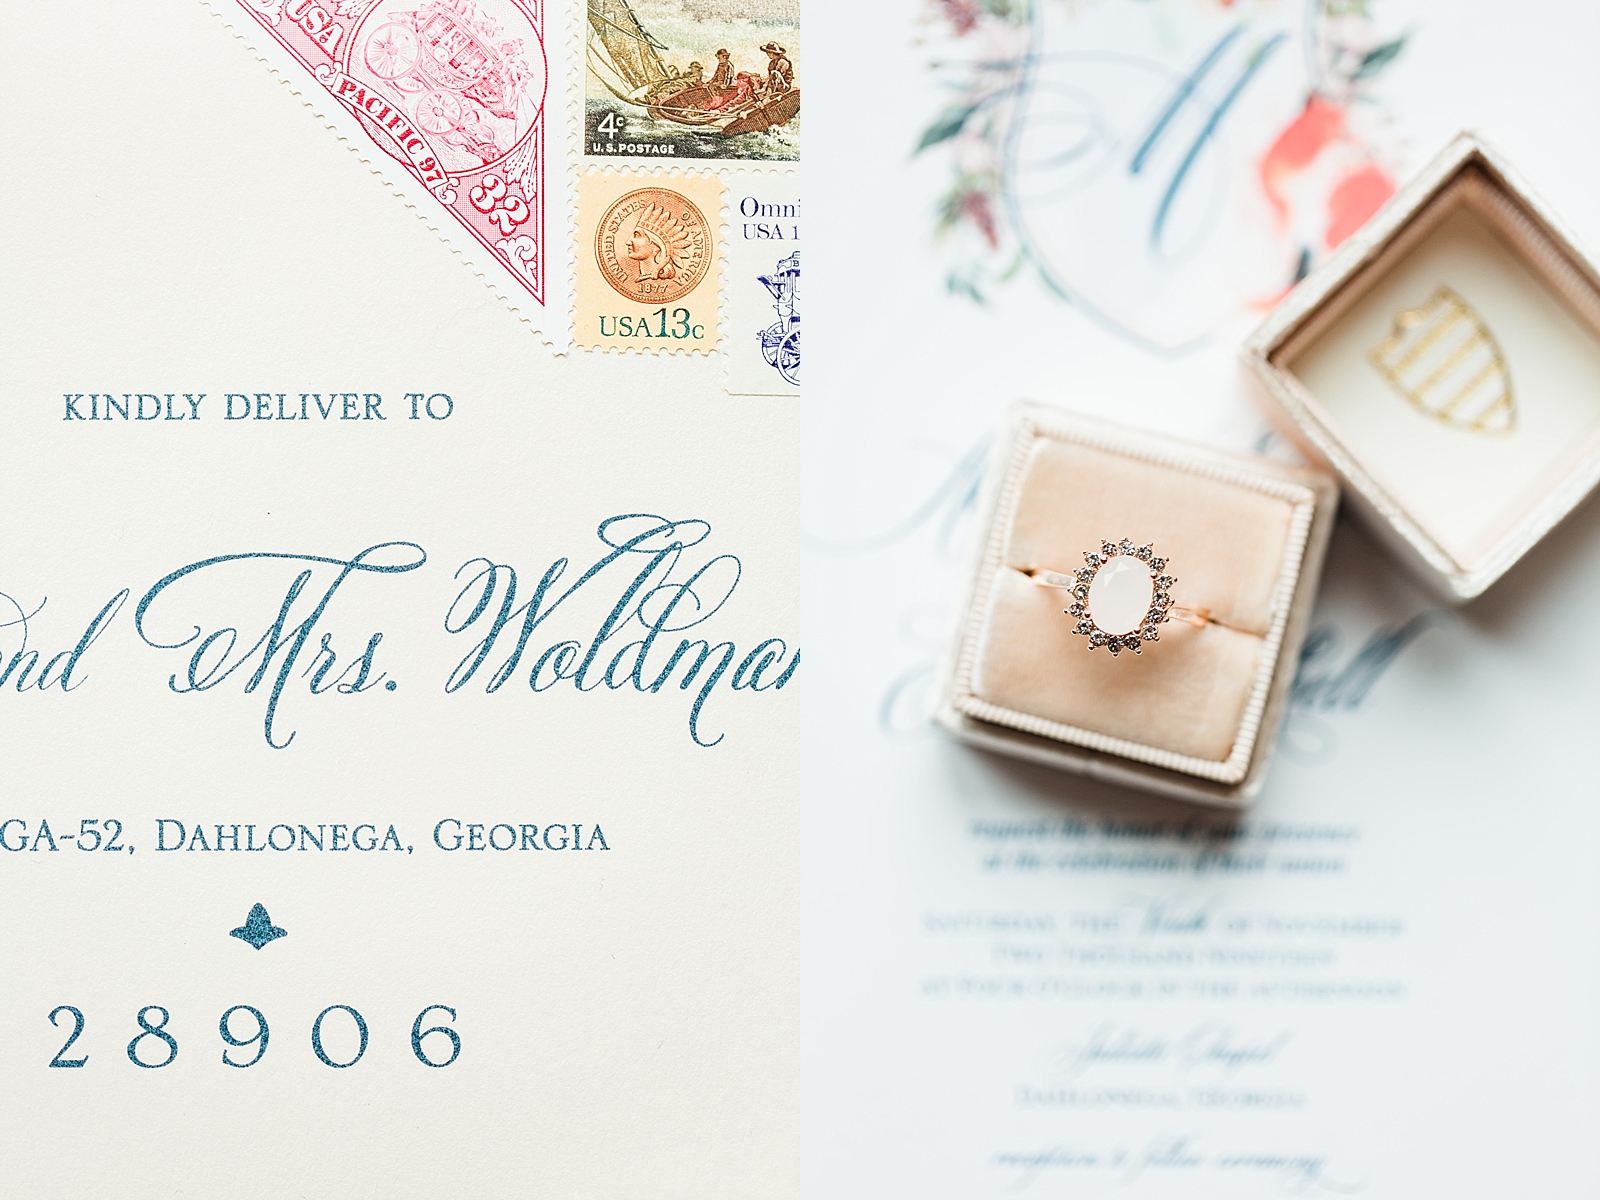 Juliette Chapel Wedding Detail of Invitation Suite envelope and Ring Photos